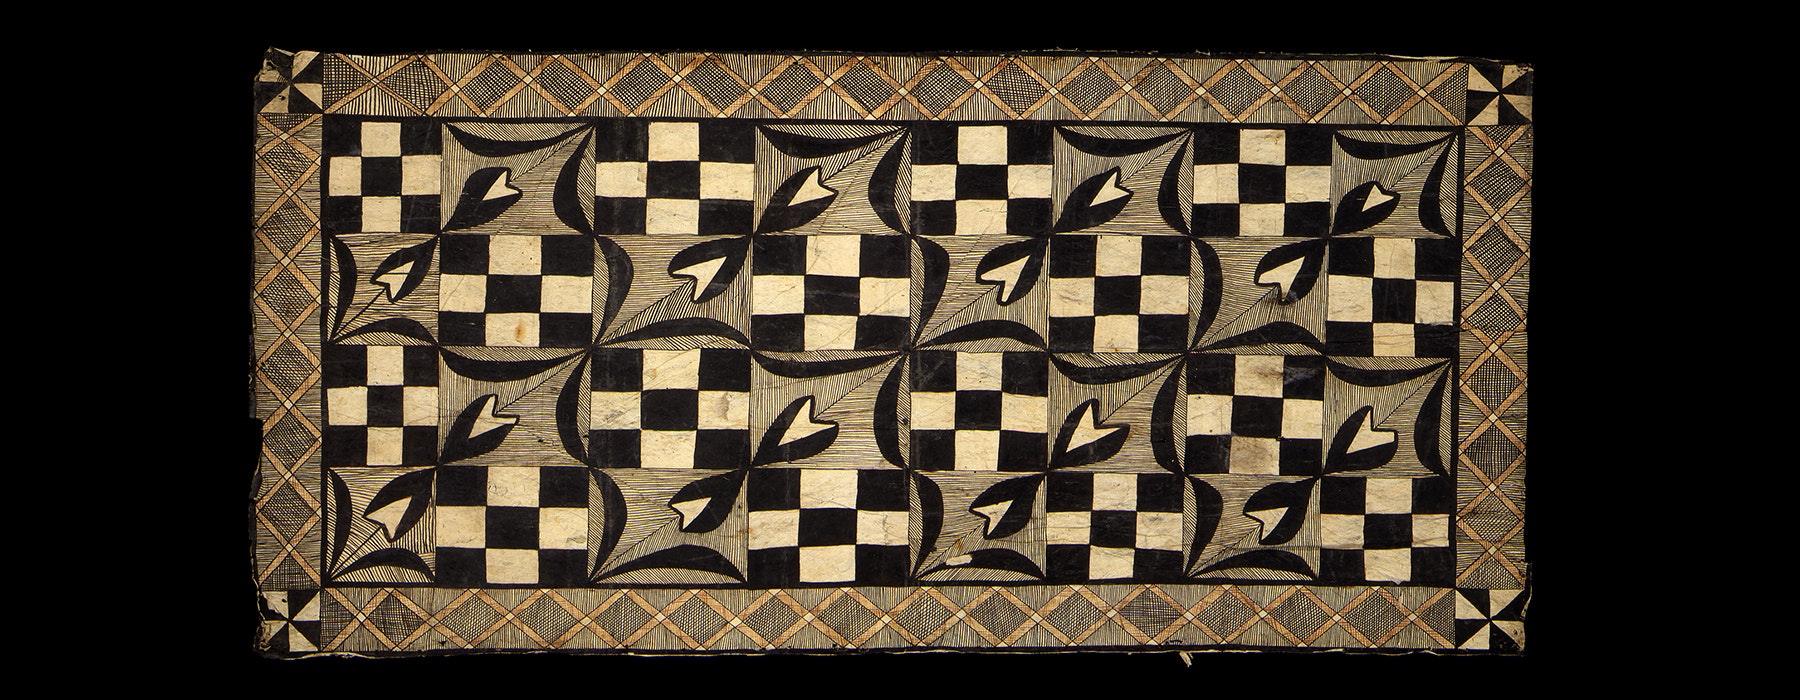 A Sāmoan tapa cloth with repeating patterns